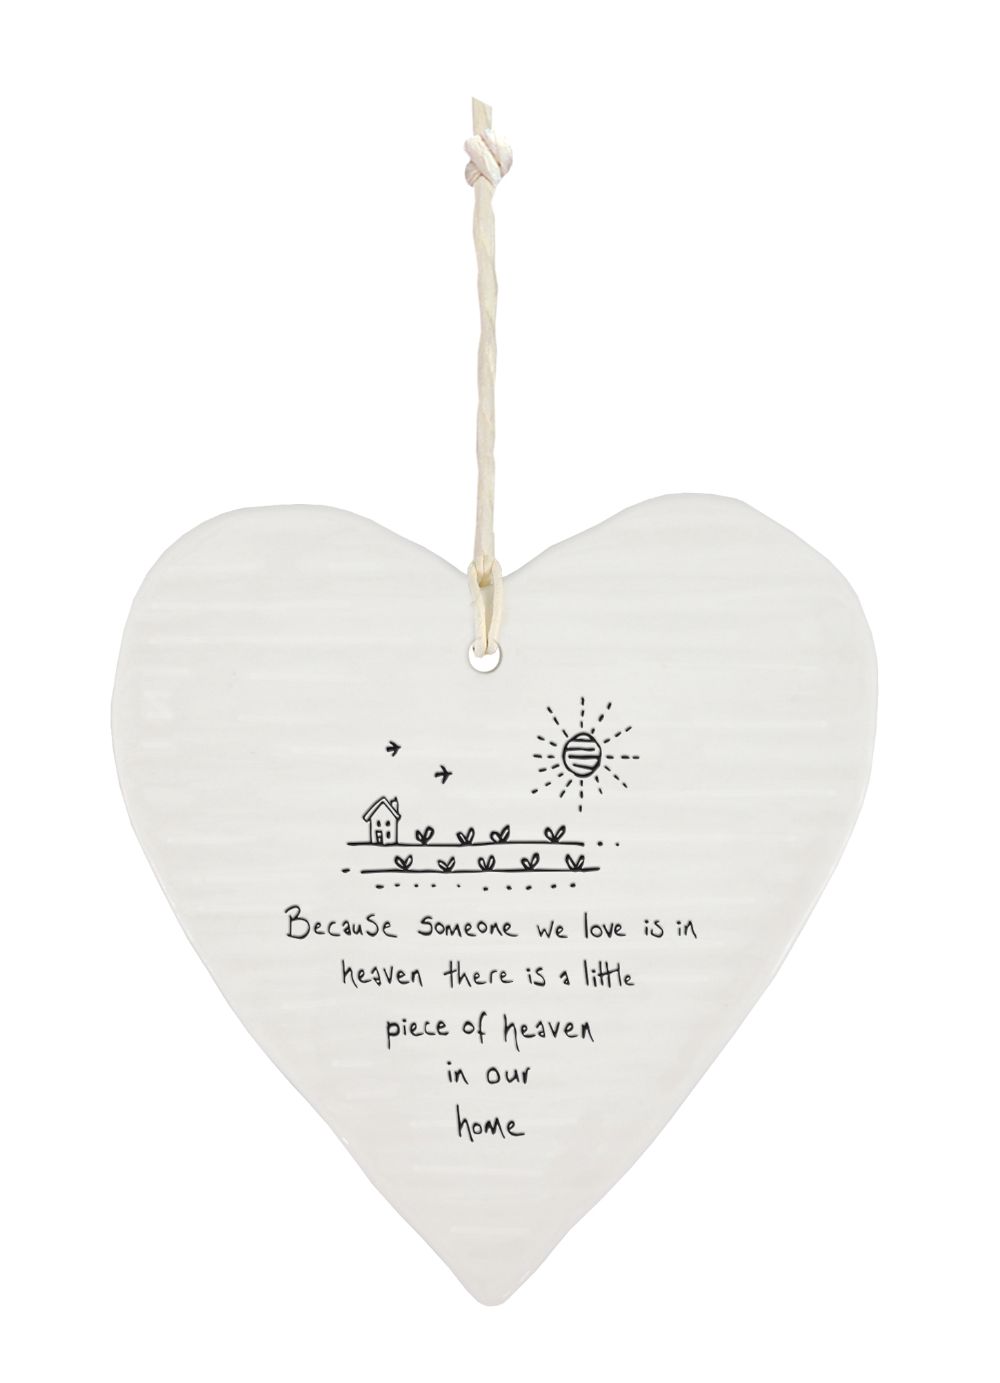 East Of India Piece Of Heaven Wobbly Heart Shaped Ceramic Hanging Plaque